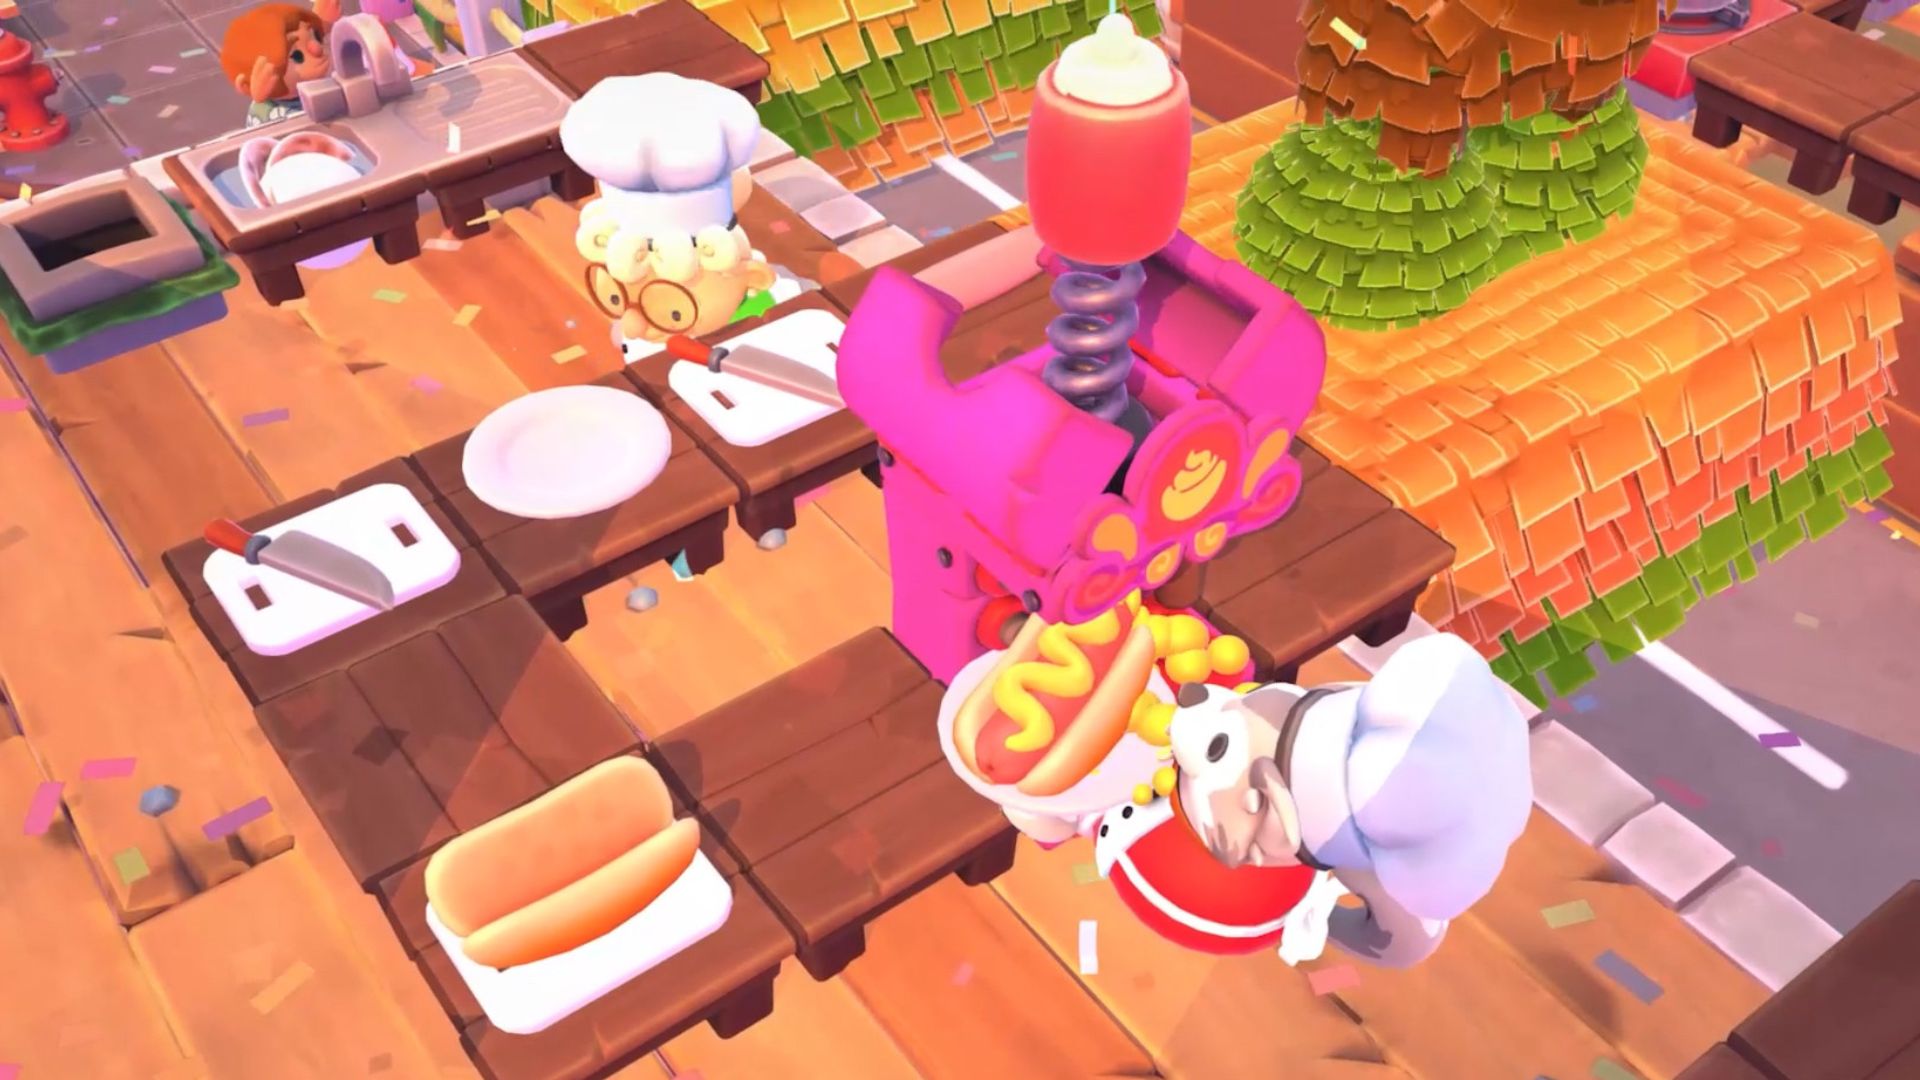 Delicious World - Cooking Game on the App Store  Restaurant game, Game of  the day, Cooking games